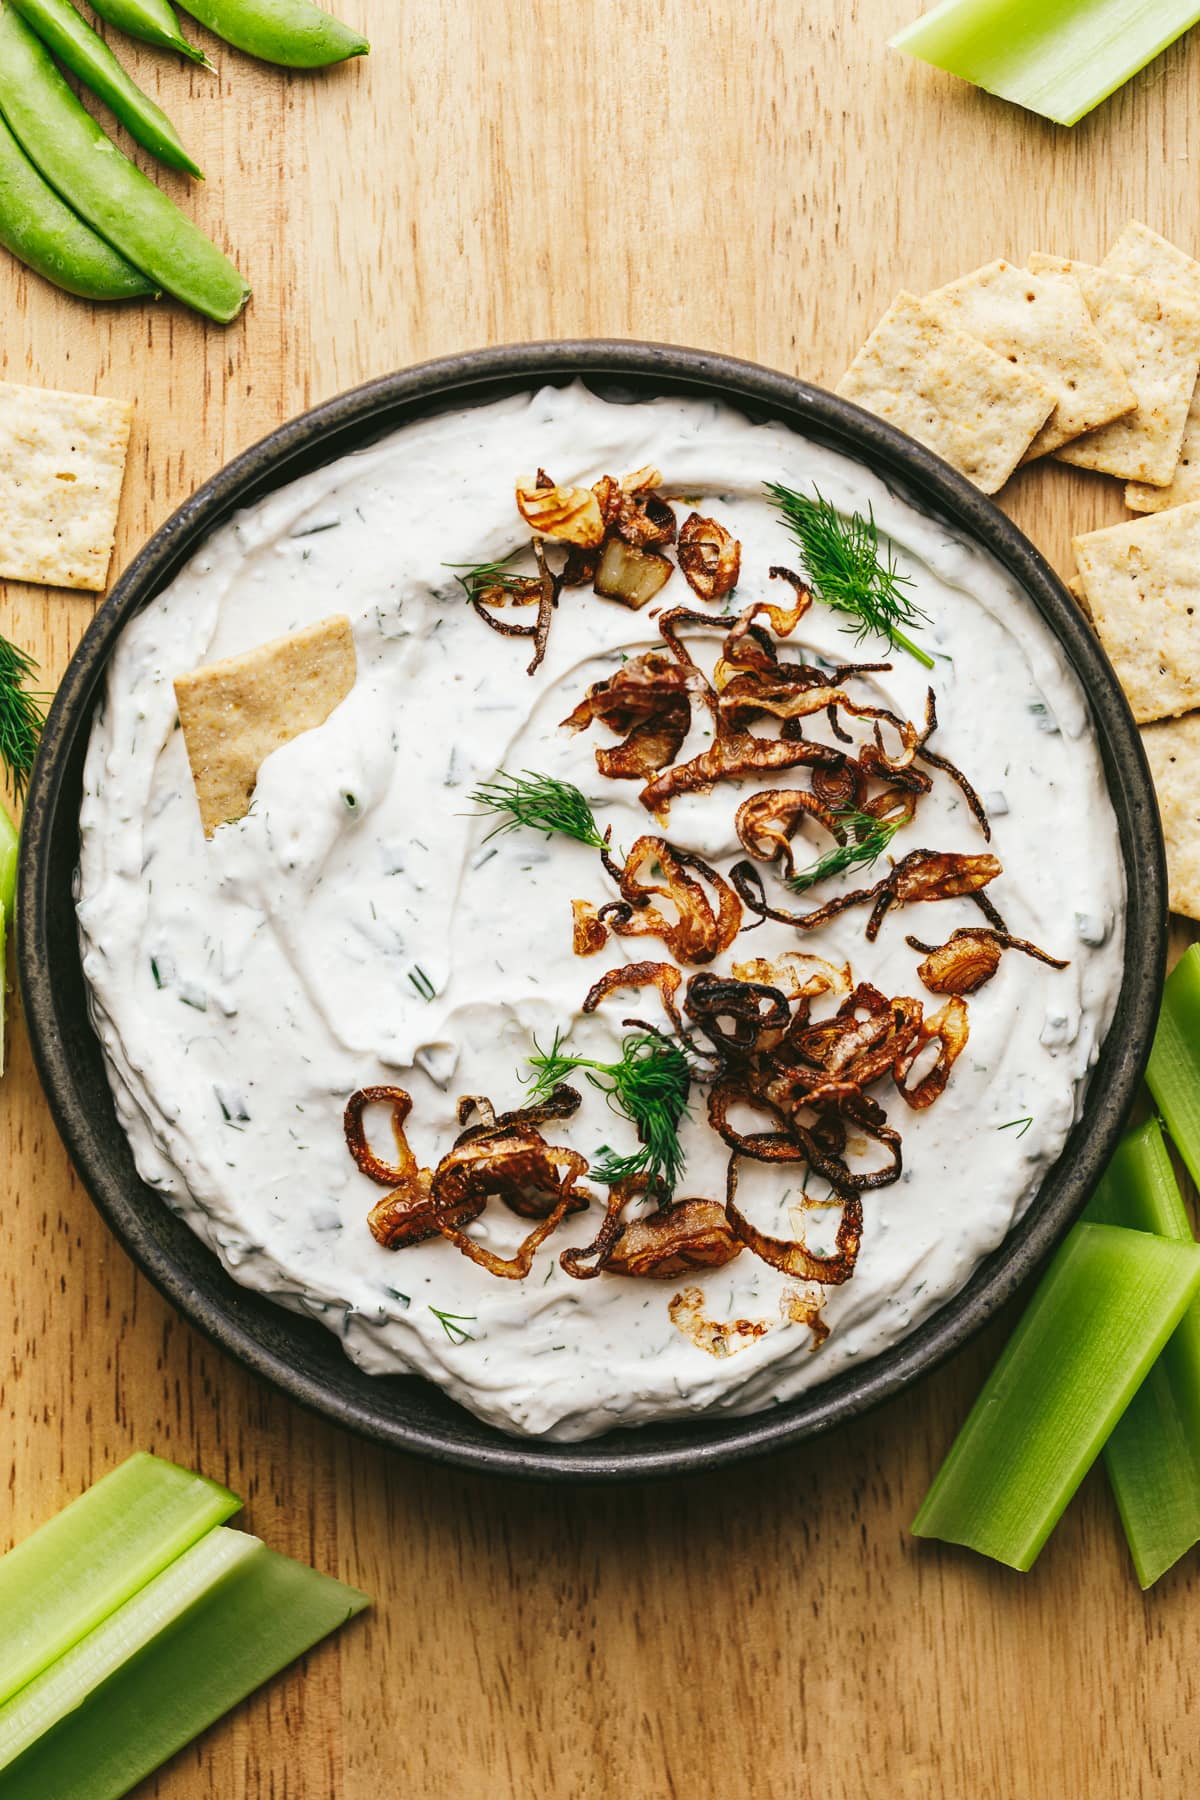 Cottage cheese dip with crackers and veggies on a cutting board.